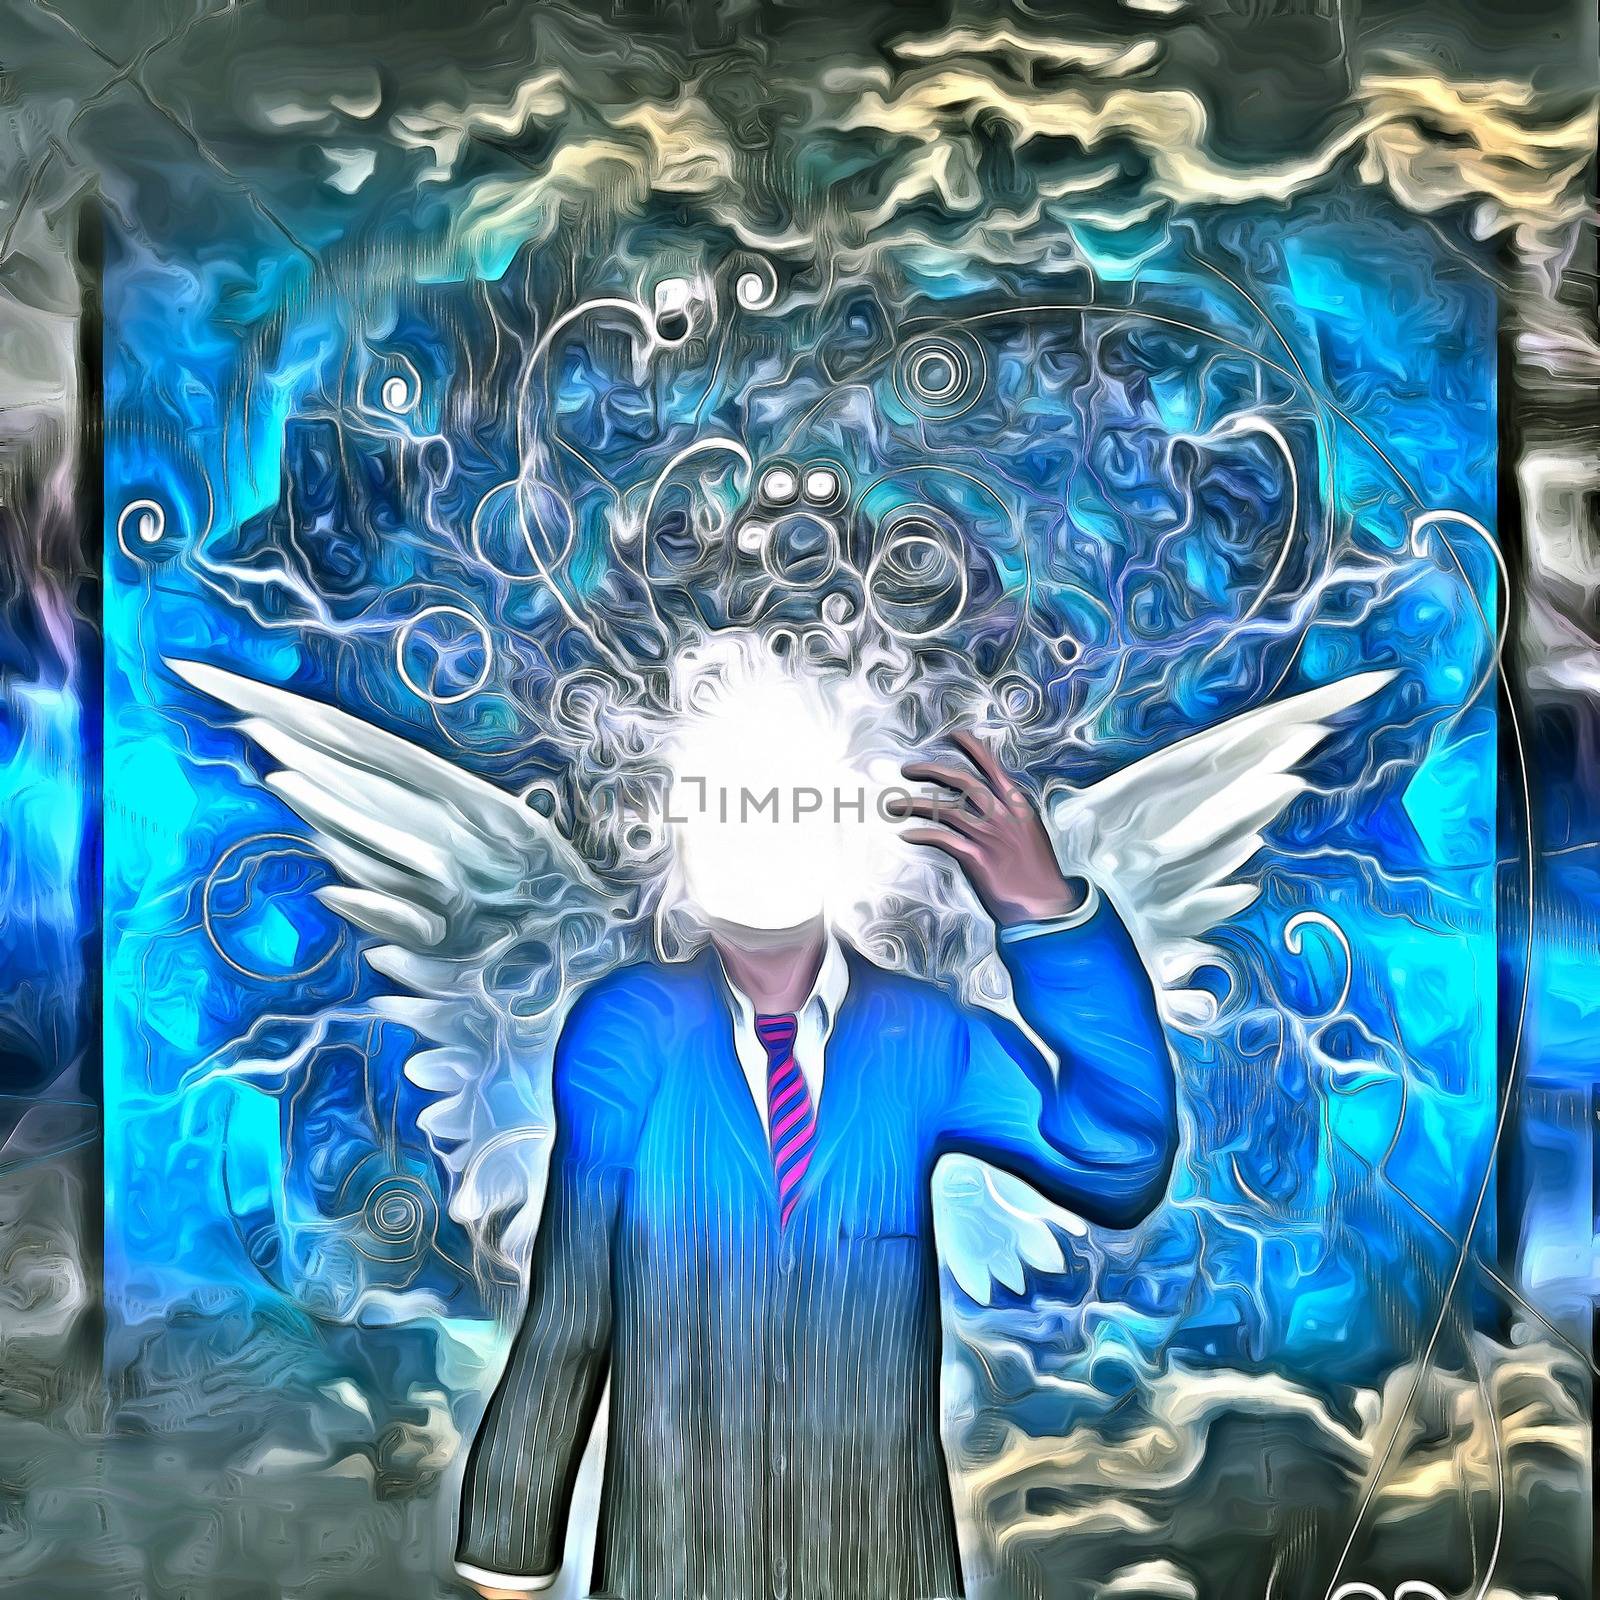 Surreal painting. Faceless man in suit with white wings. Clouds on a background.